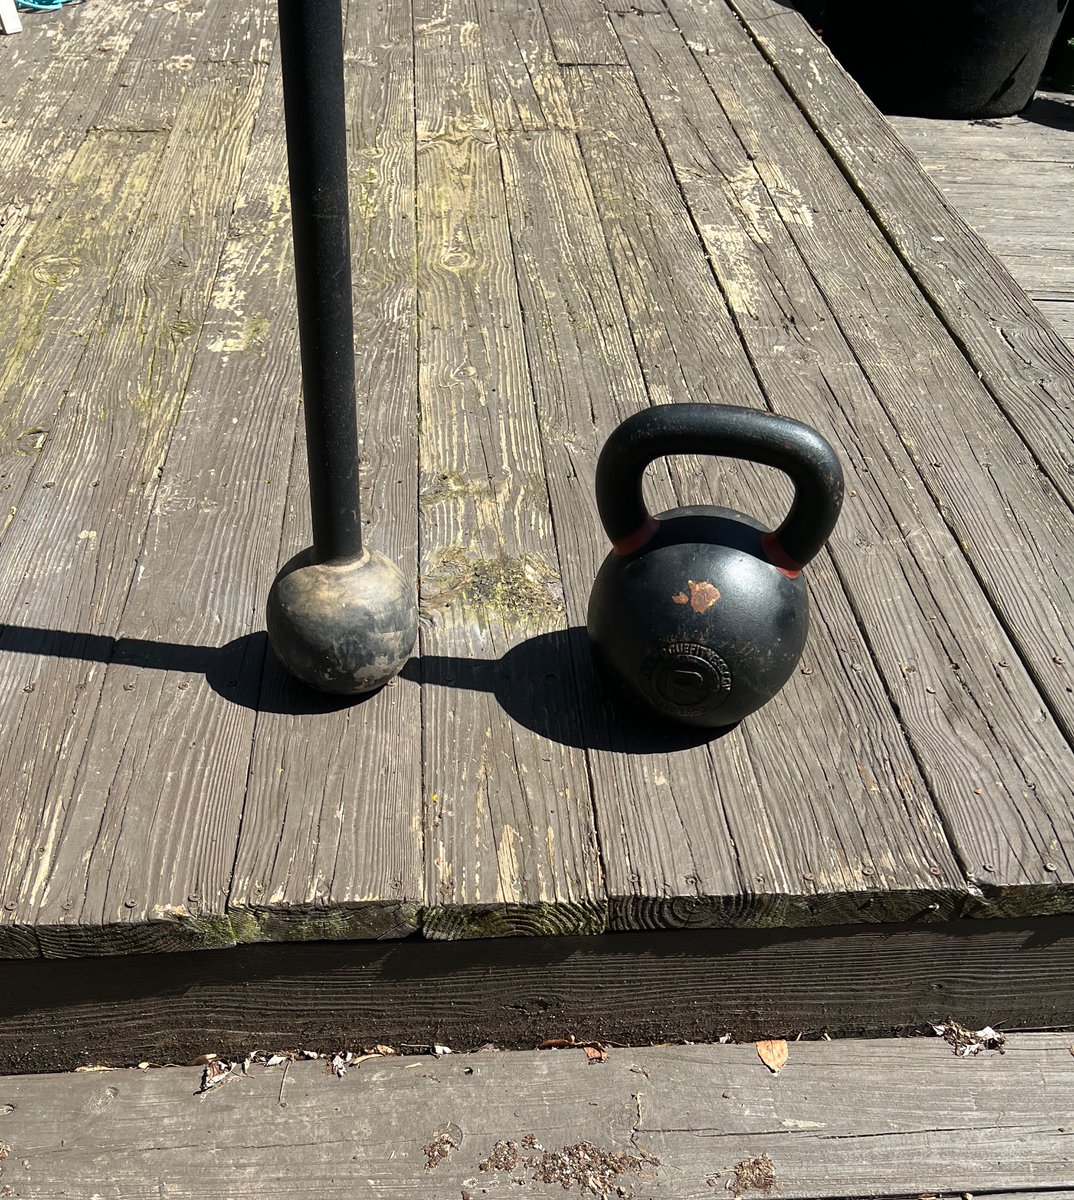 When I’m swinging these things around I can’t tell if I look like the crazed barbarian I hope to be… or like someone who dropped out of clown school to become self taught.

#DFIRfit